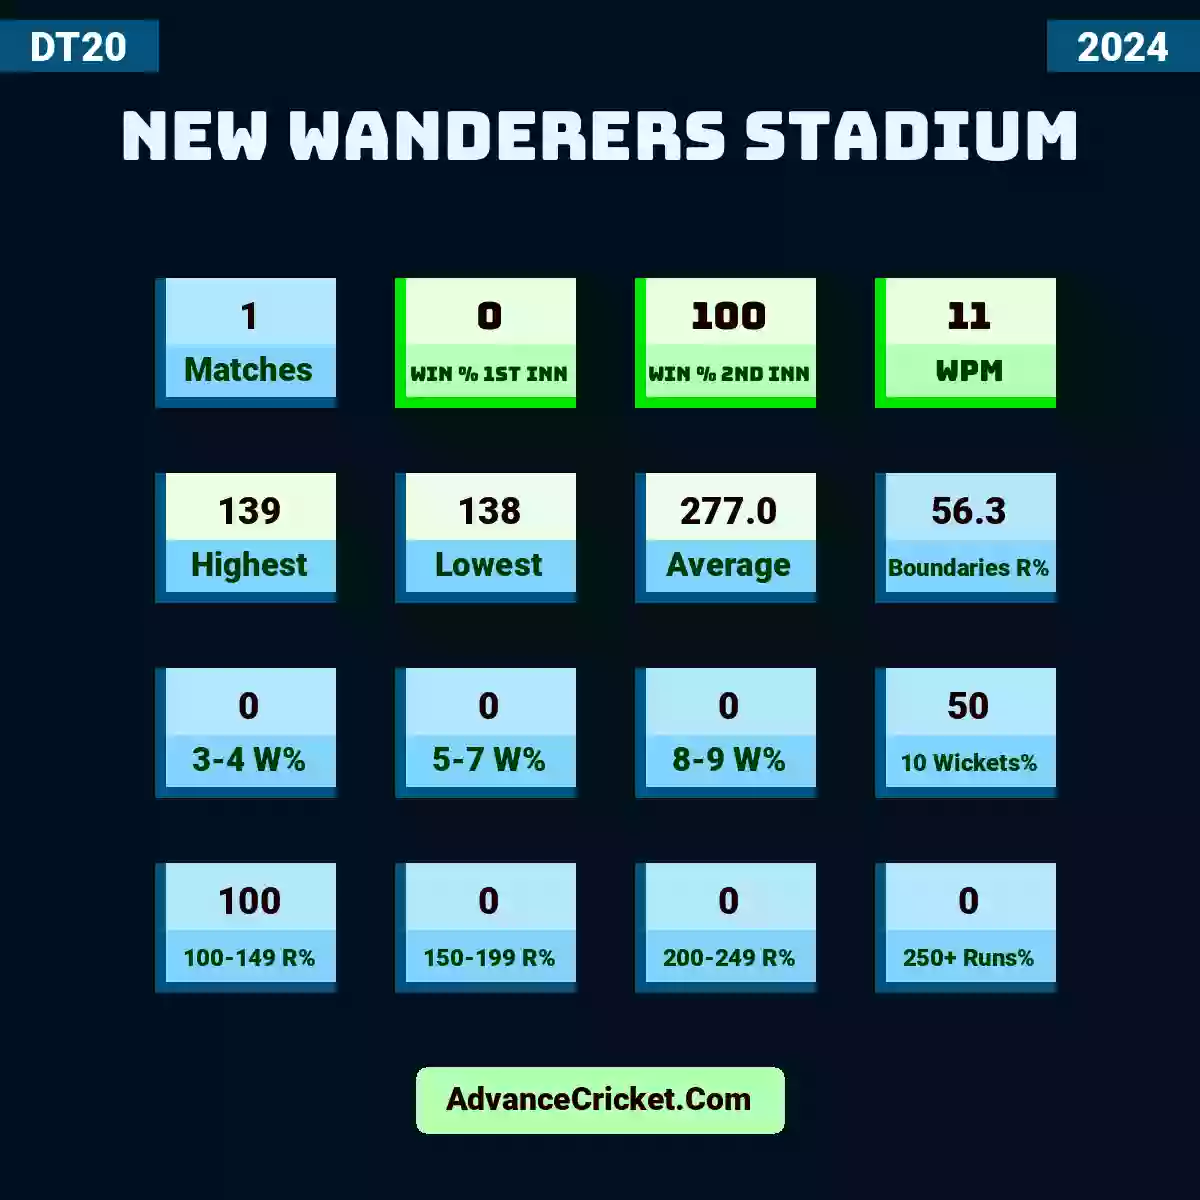 Image showing New Wanderers Stadium with Matches: 1, Win % 1st Inn: 0, Win % 2nd Inn: 100, WPM: 11, Highest: 139, Lowest: 138, Average: 277.0, Boundaries R%: 56.3, 3-4 W%: 0, 5-7 W%: 0, 8-9 W%: 0, 10 Wickets%: 50, 100-149 R%: 100, 150-199 R%: 0, 200-249 R%: 0, 250+ Runs%: 0.